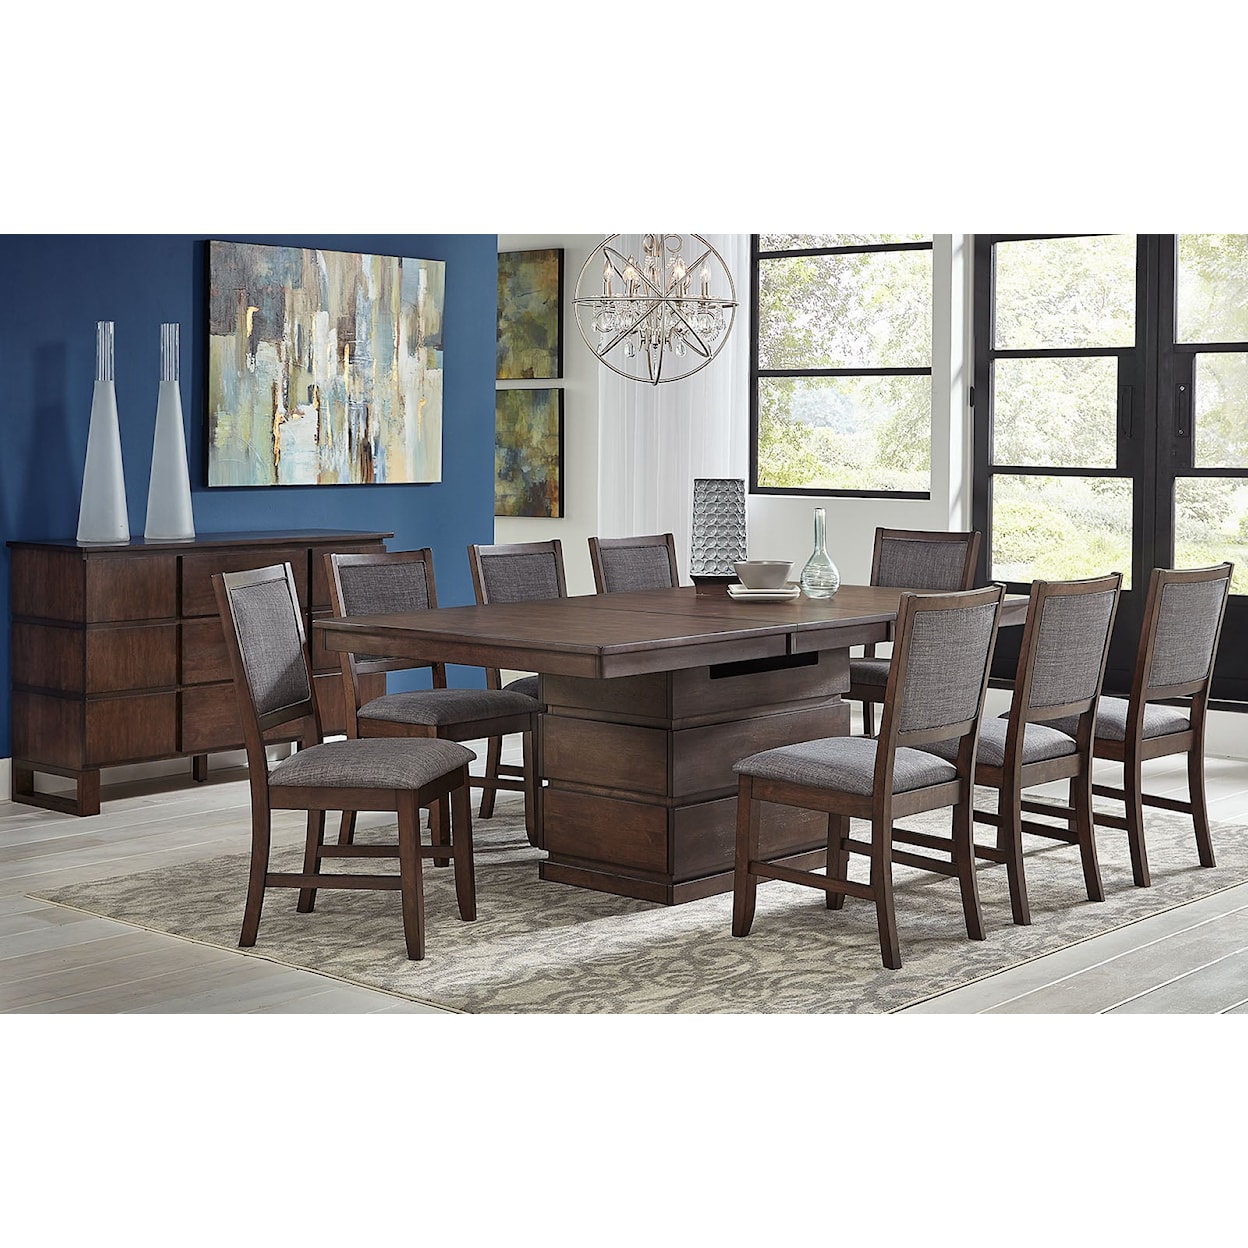 AAmerica Chesney Adjustable Dining Table